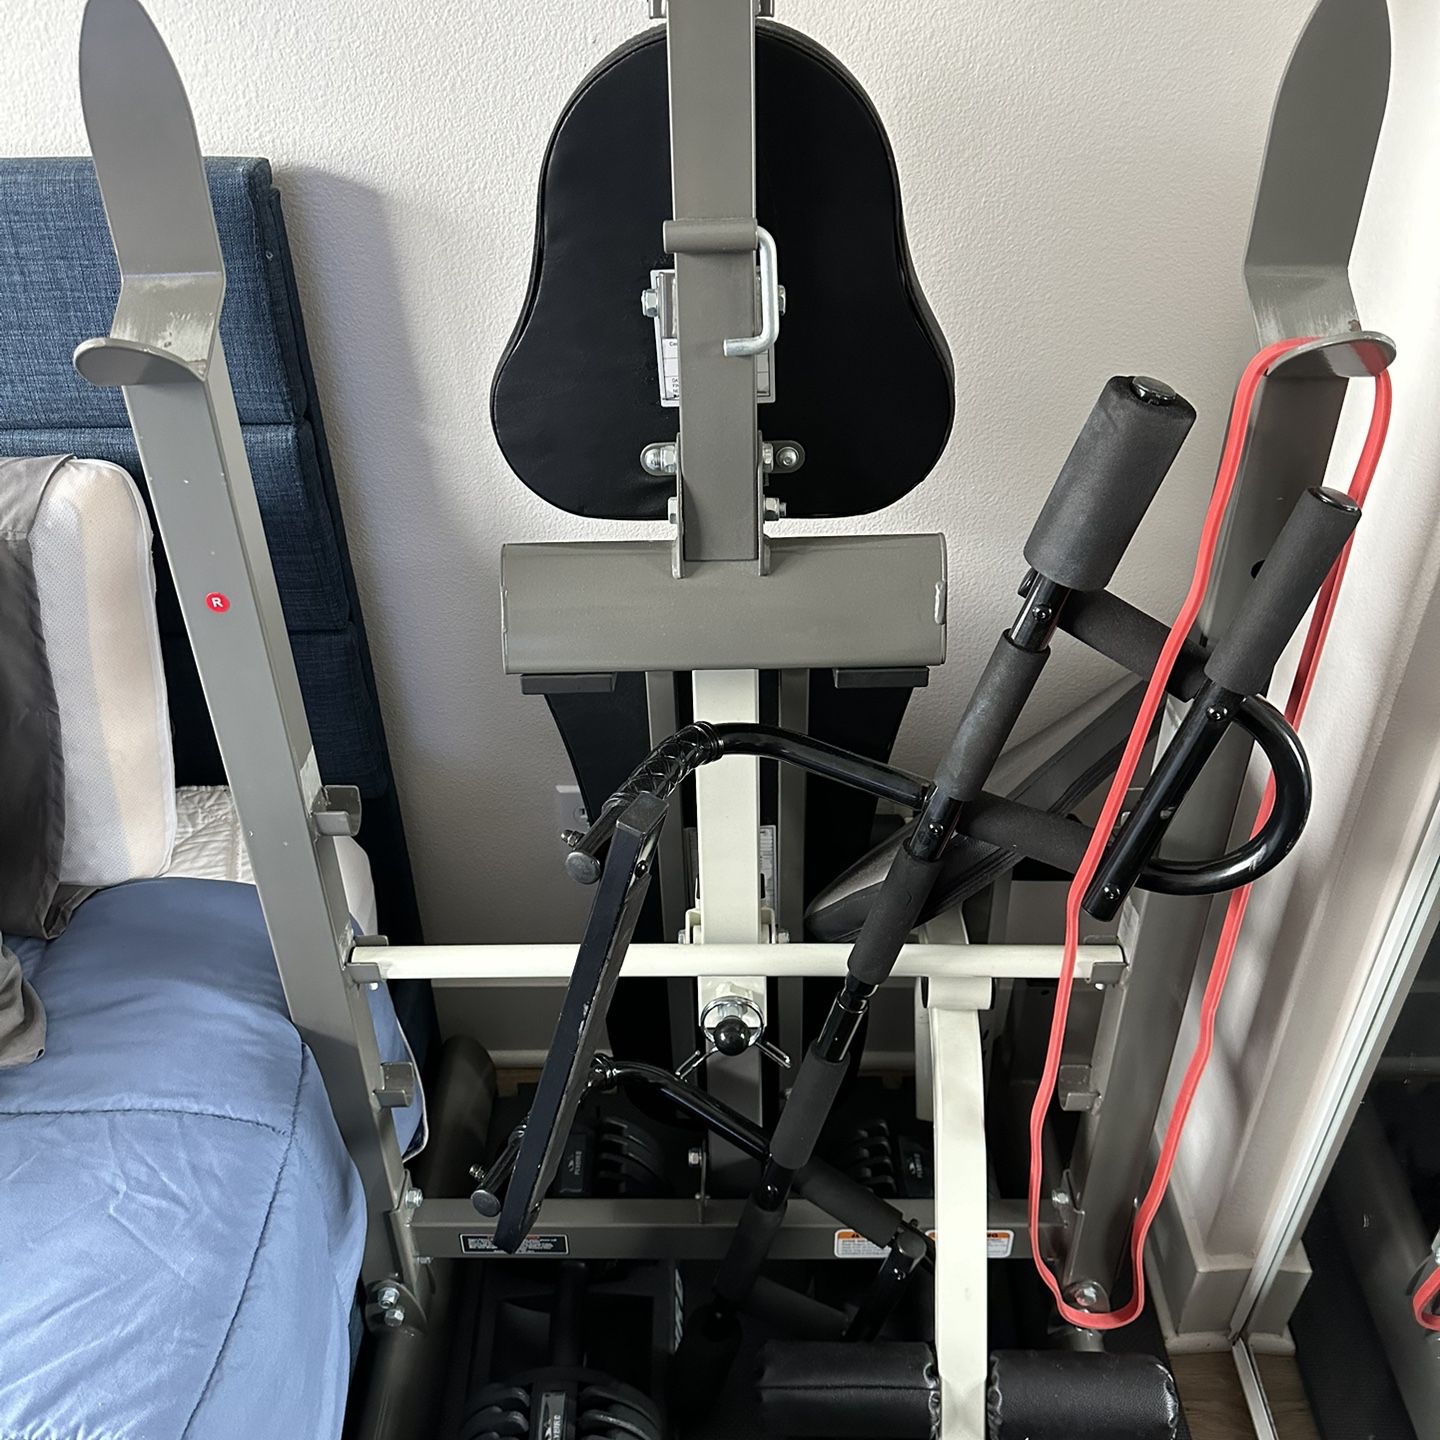 Foldable Home Gym with 2 Adjustable Dumbbells